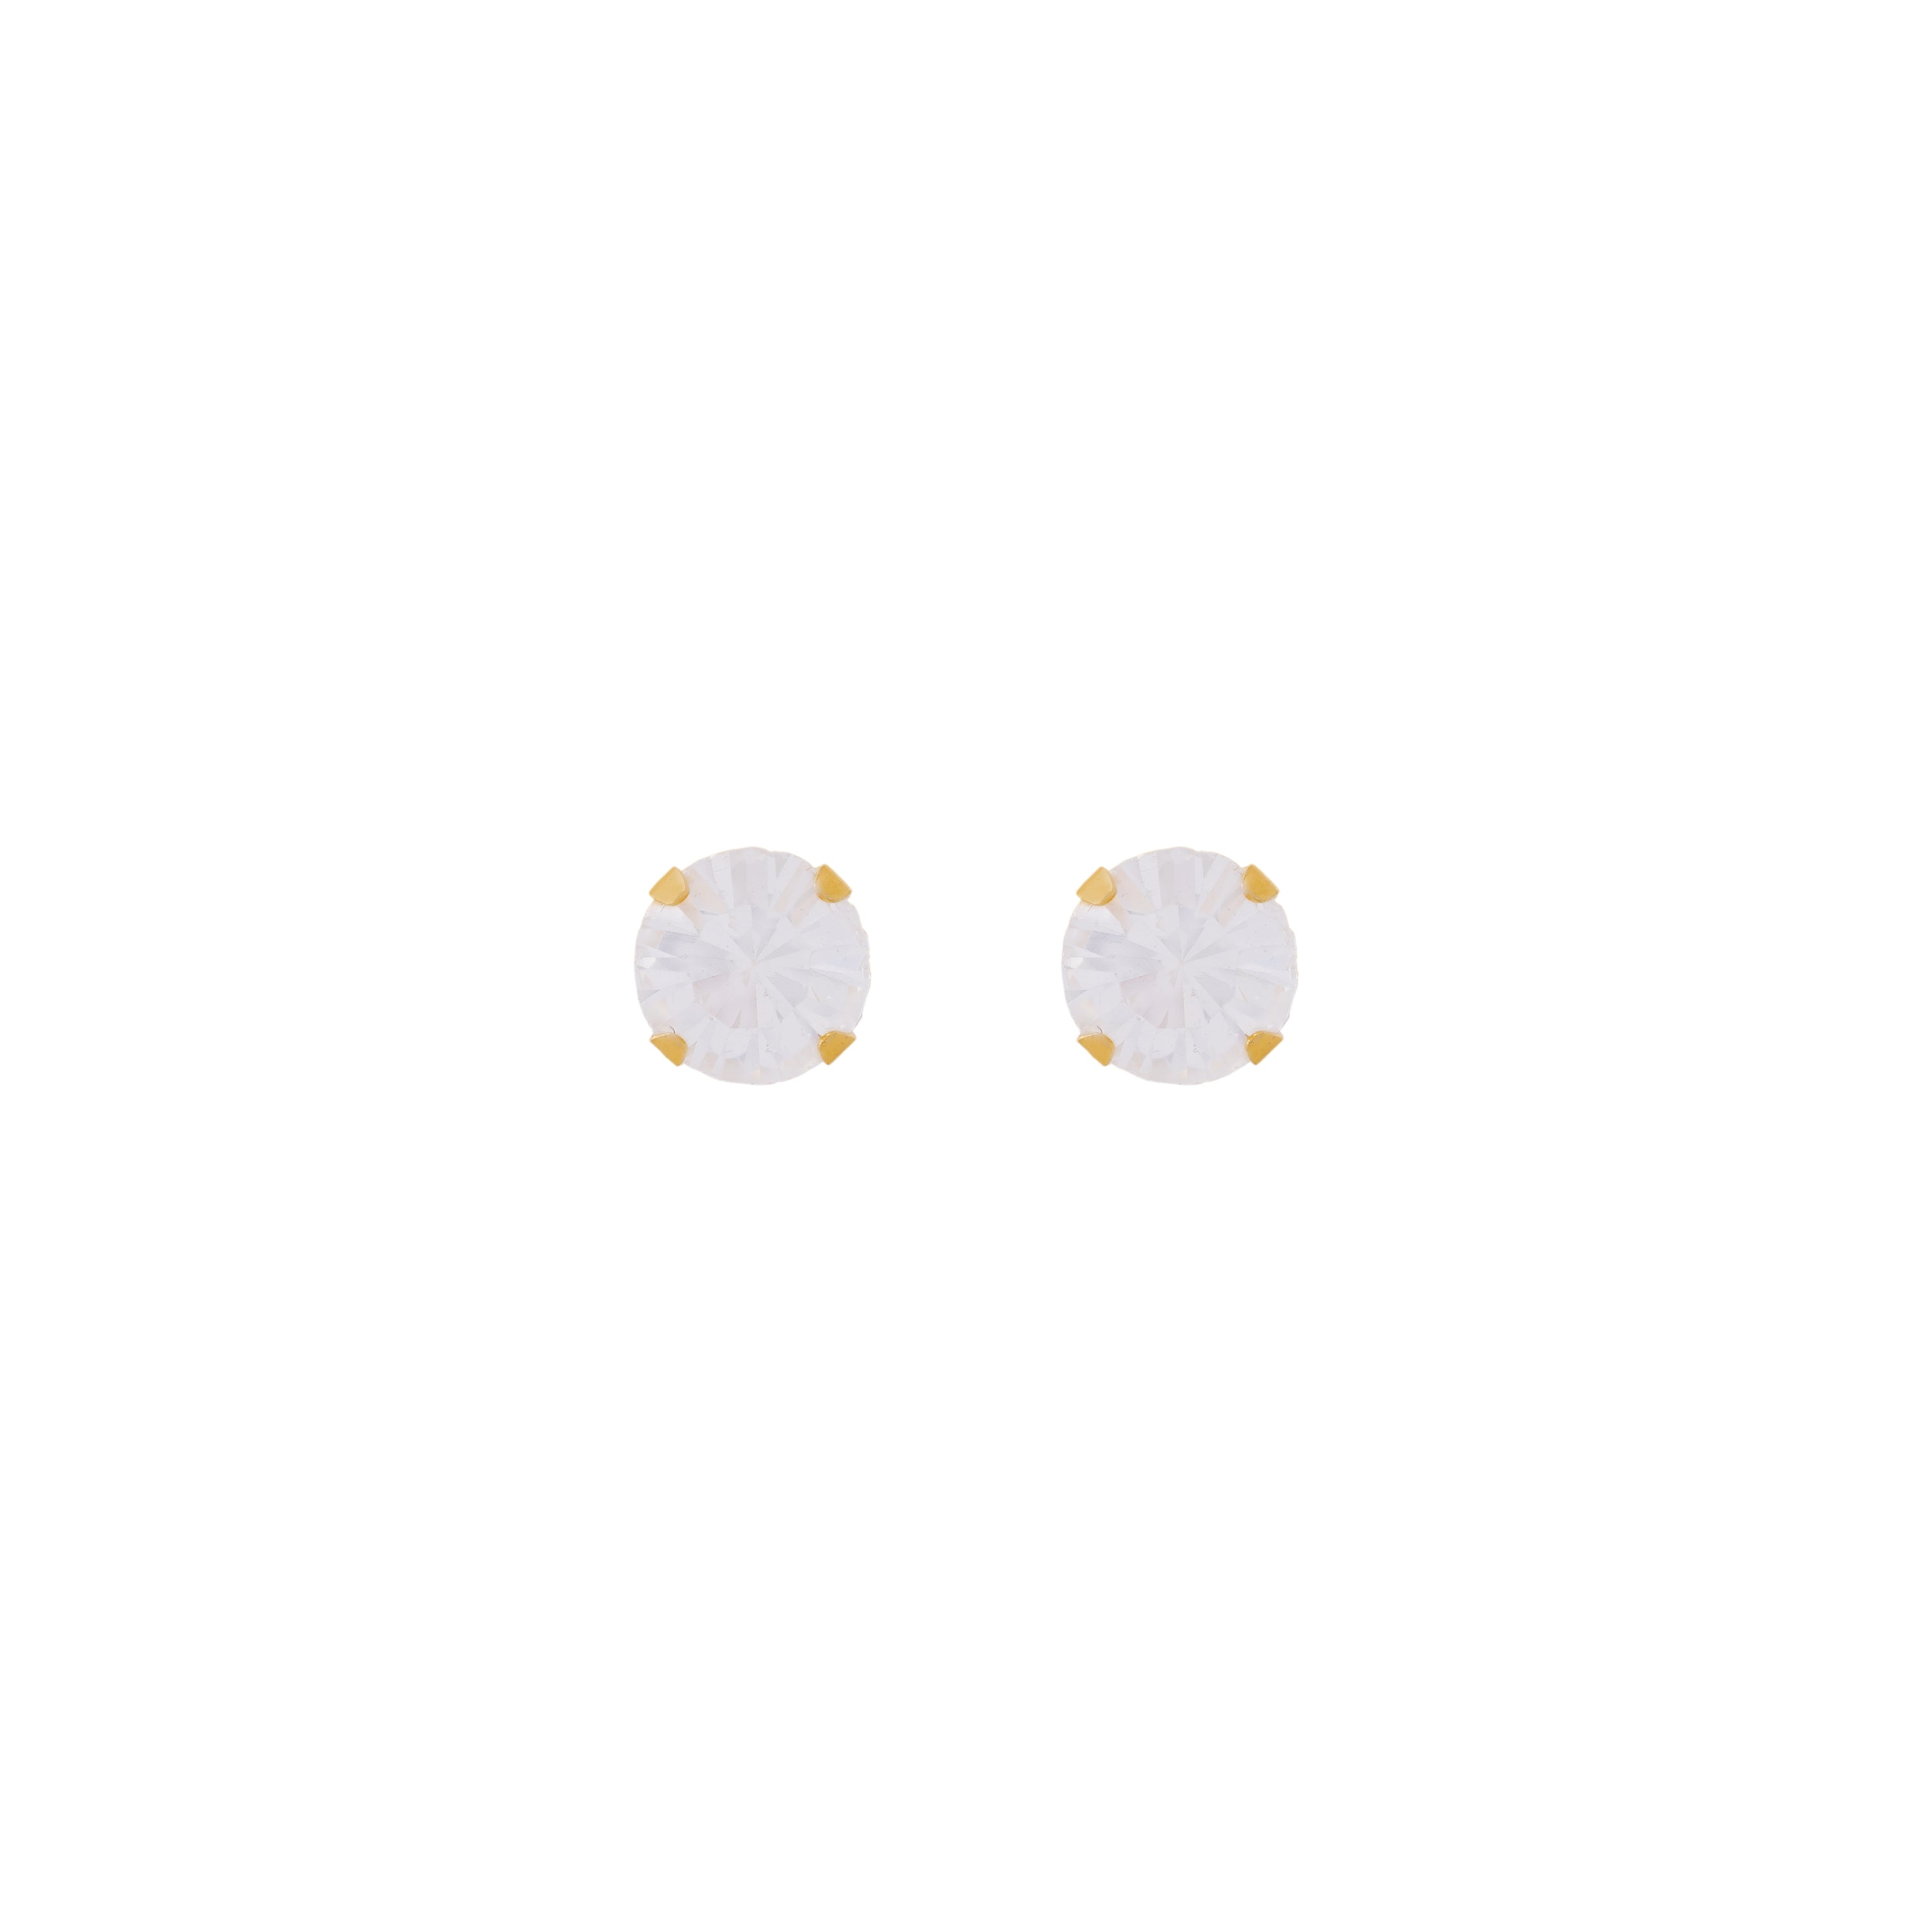 5MM Apr Crystal 24K Pure Gold Plated Ear Stud | MADE IN USA | Ideal for everyday wear